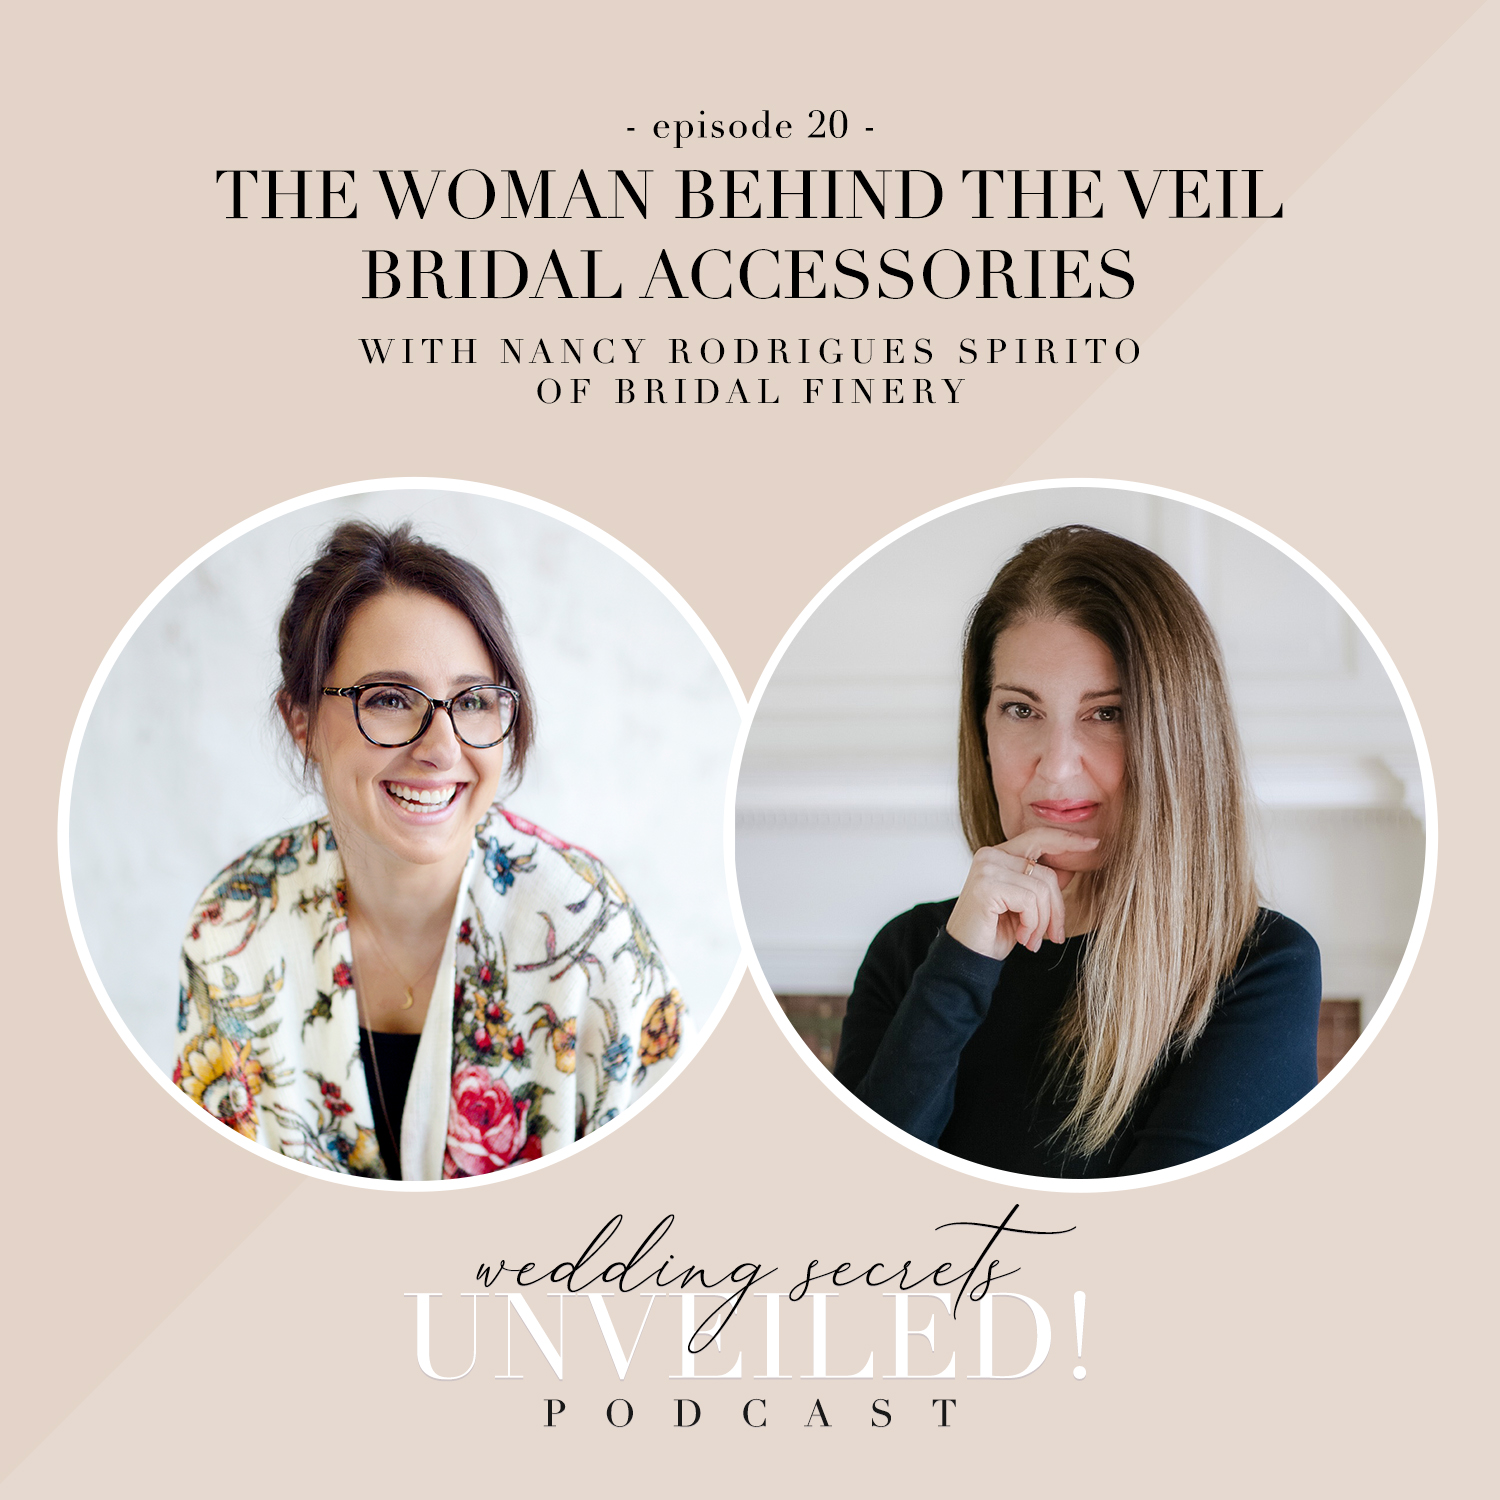 Bridal Accessories:  Interview with Nancy Rodrigues Spirito of Bridal Finery on the Wedding Secrets Unveiled! Podcast